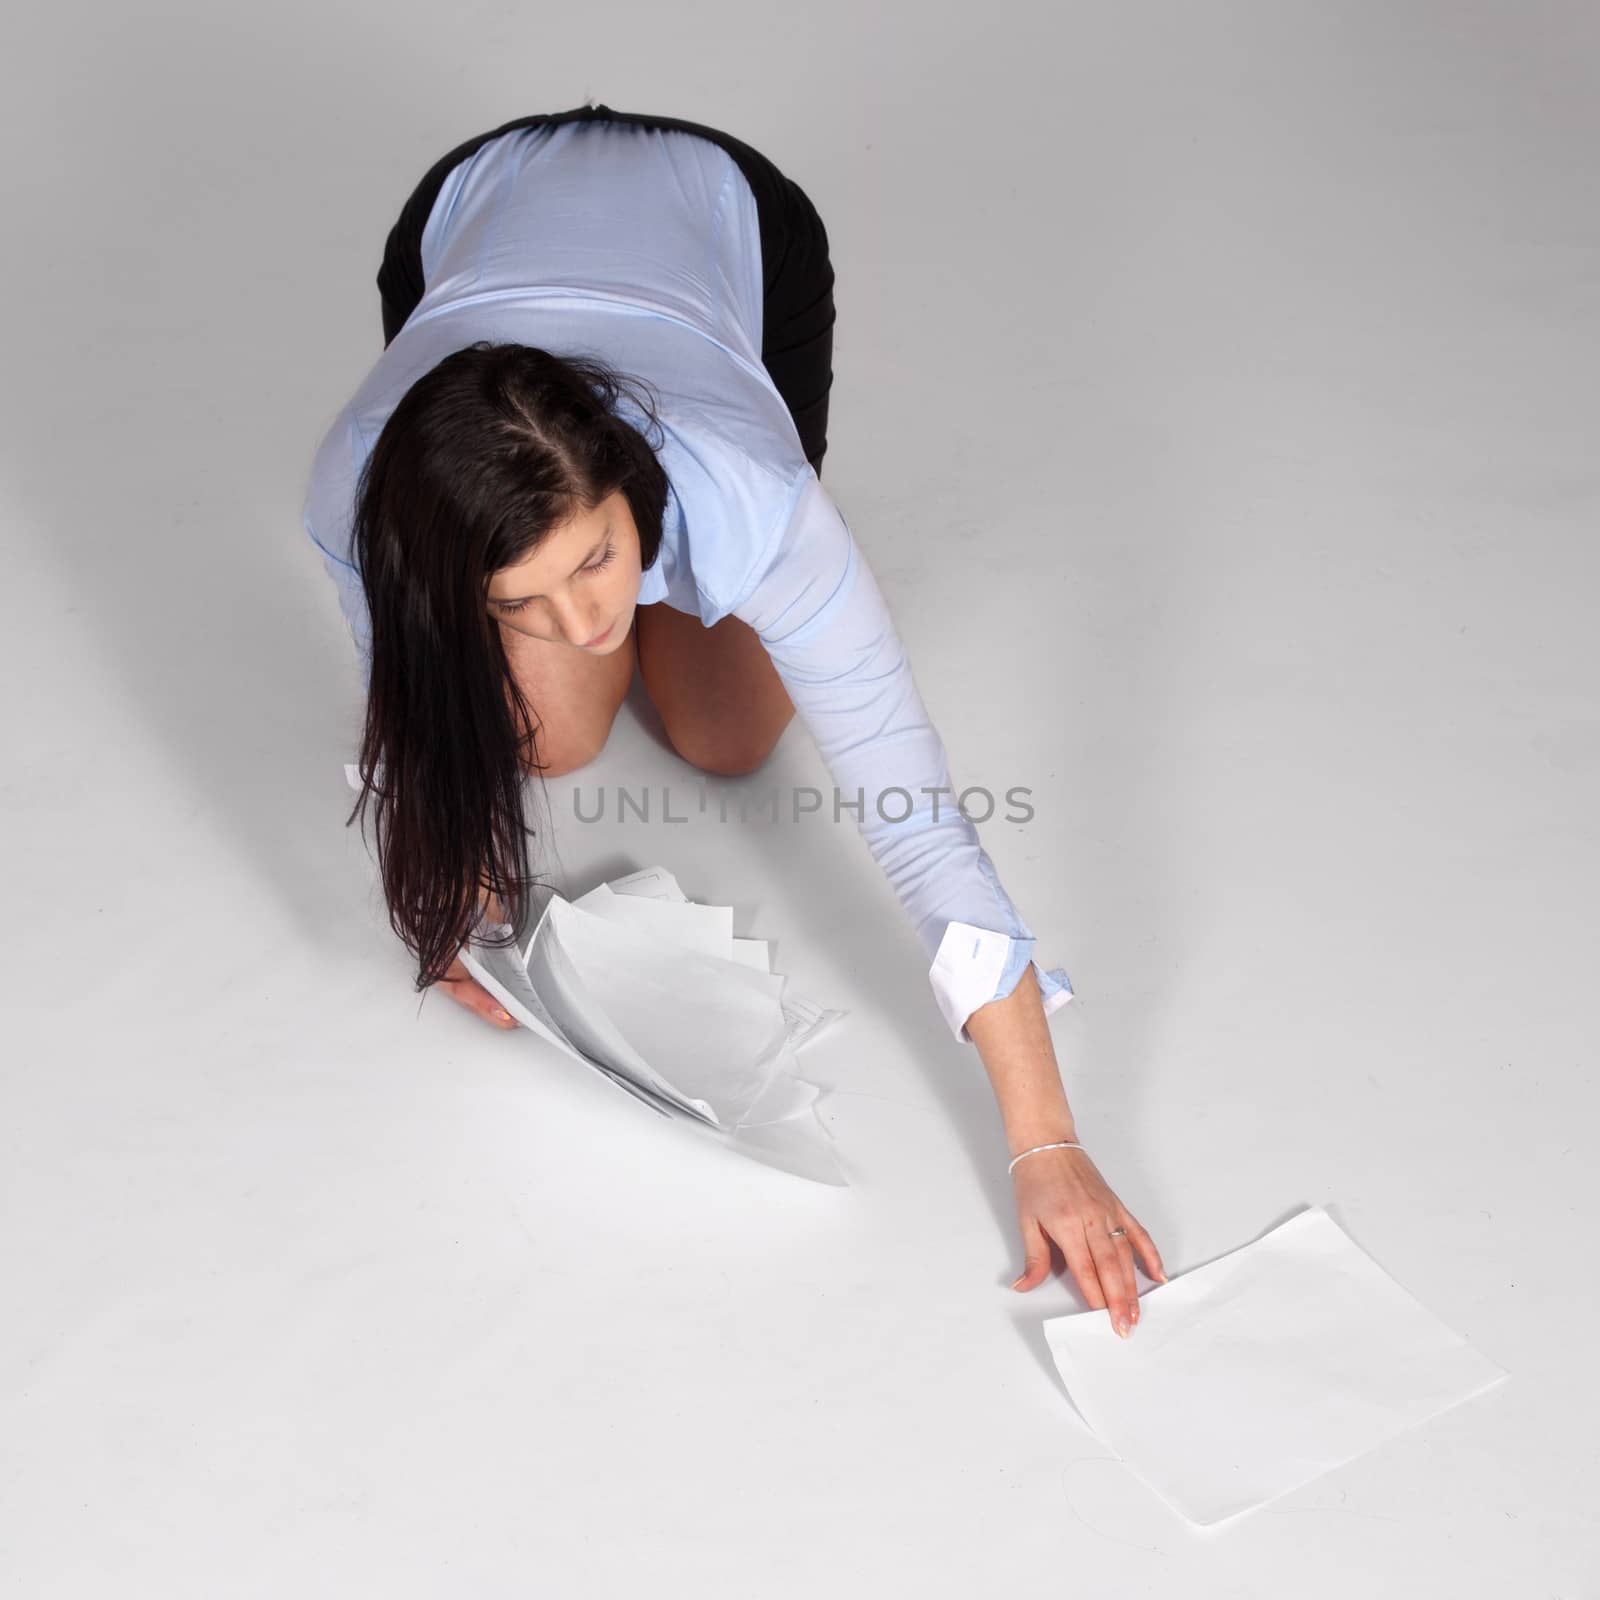 Young woman in mini skirt and blouse, on her knees raised from the ground fallen documents